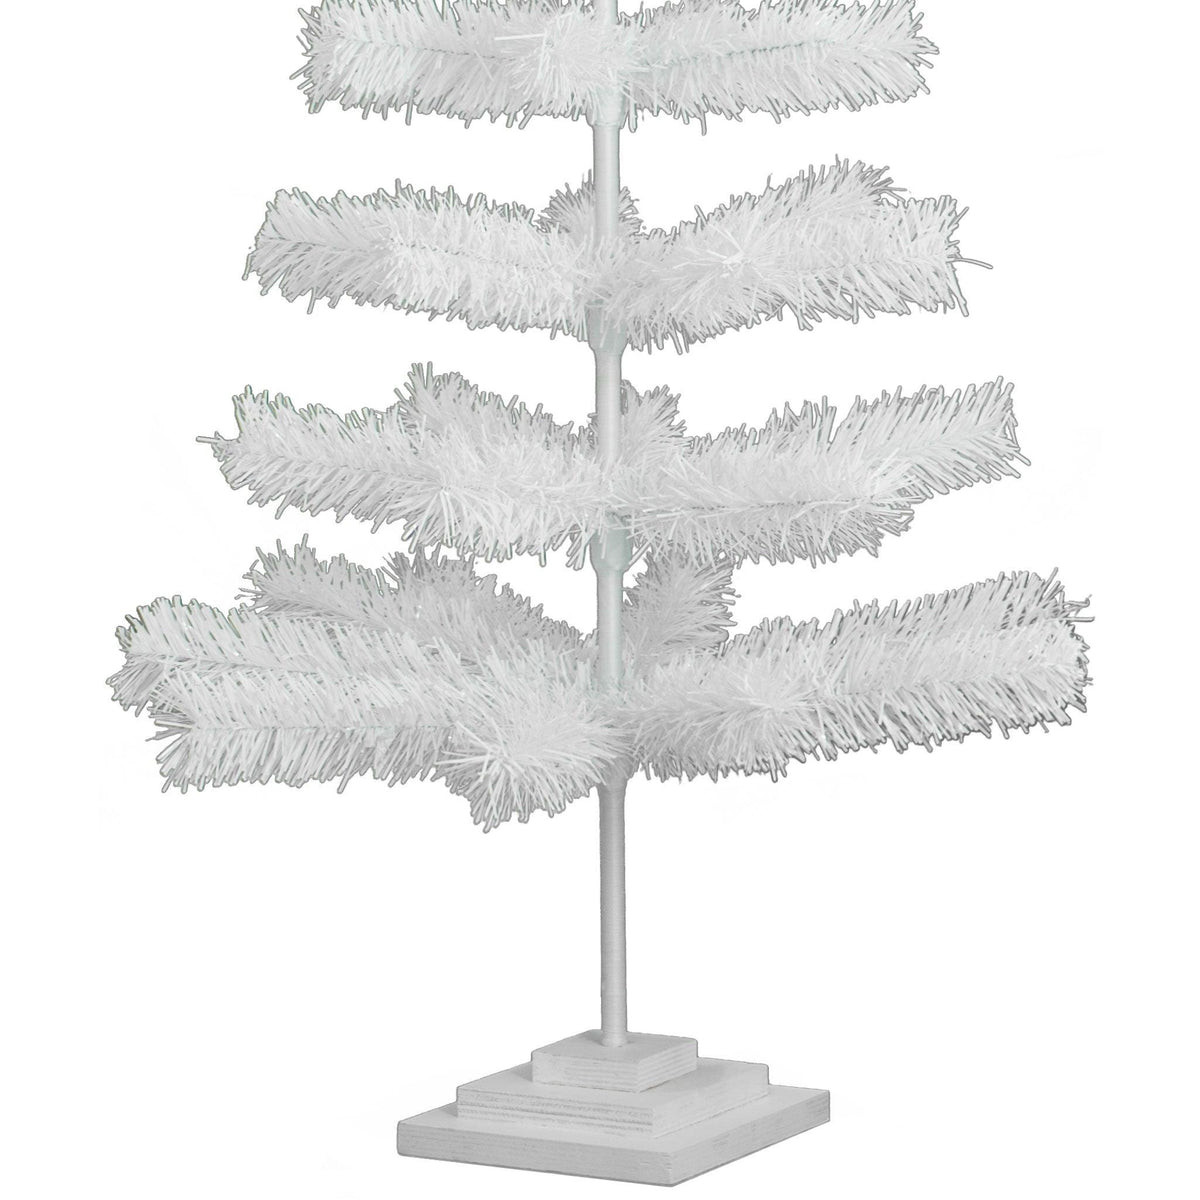 Bottom Row and Stand photographed of the 4FT White Tinsel Christmas Tree.  Lee Display's 4ft White Tinsel Christmas Tree on sale now at leedisplay.com